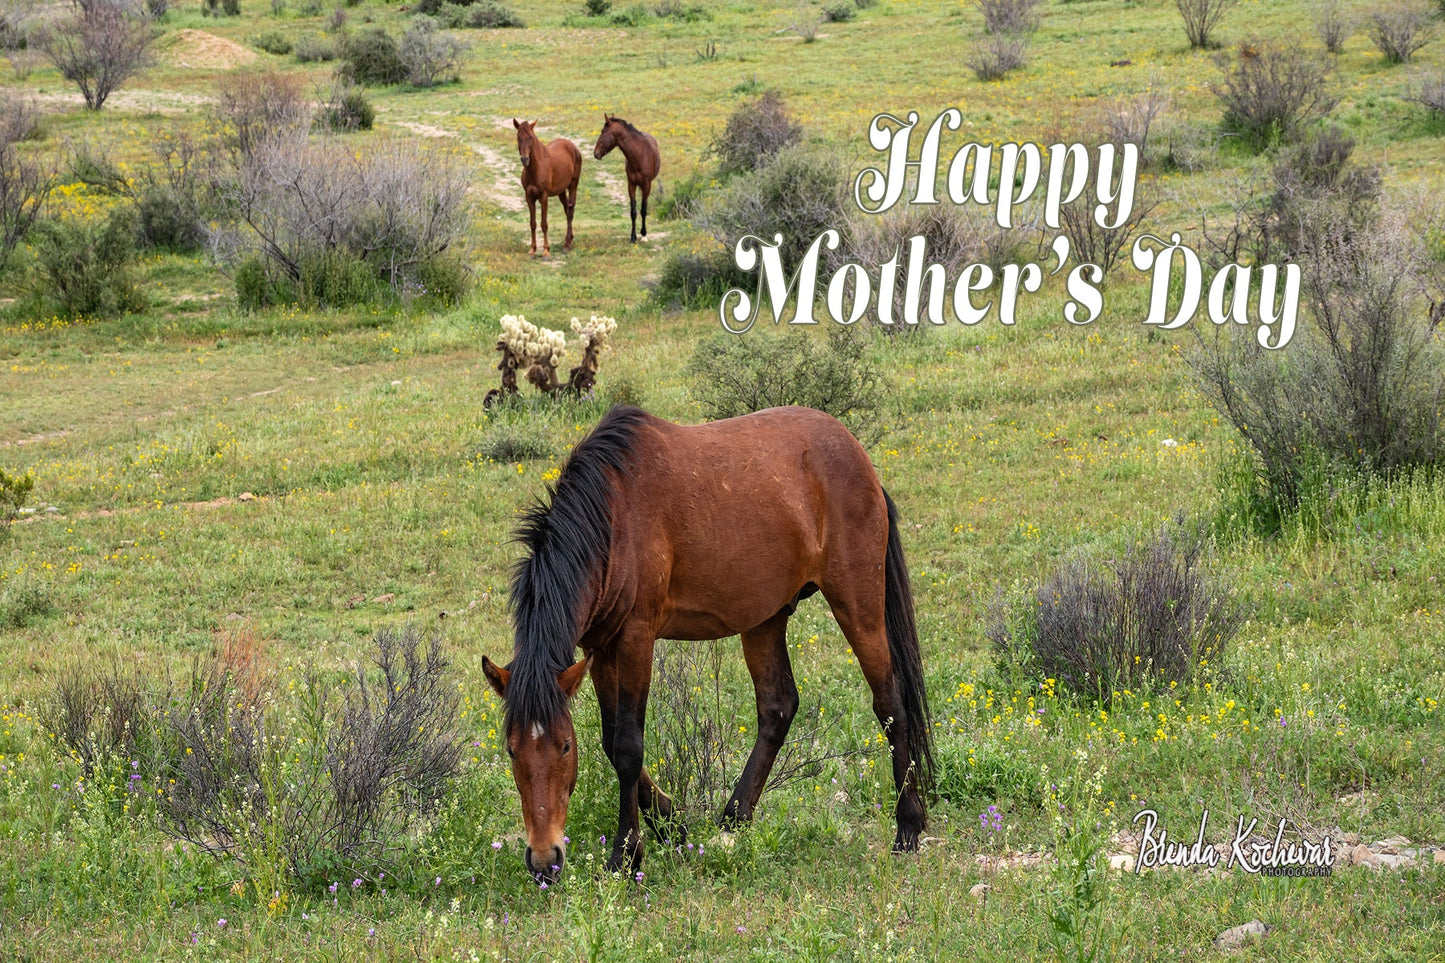 Salt River Wild Horse Friends Mother's Day Greeting Card & Bookmark Set